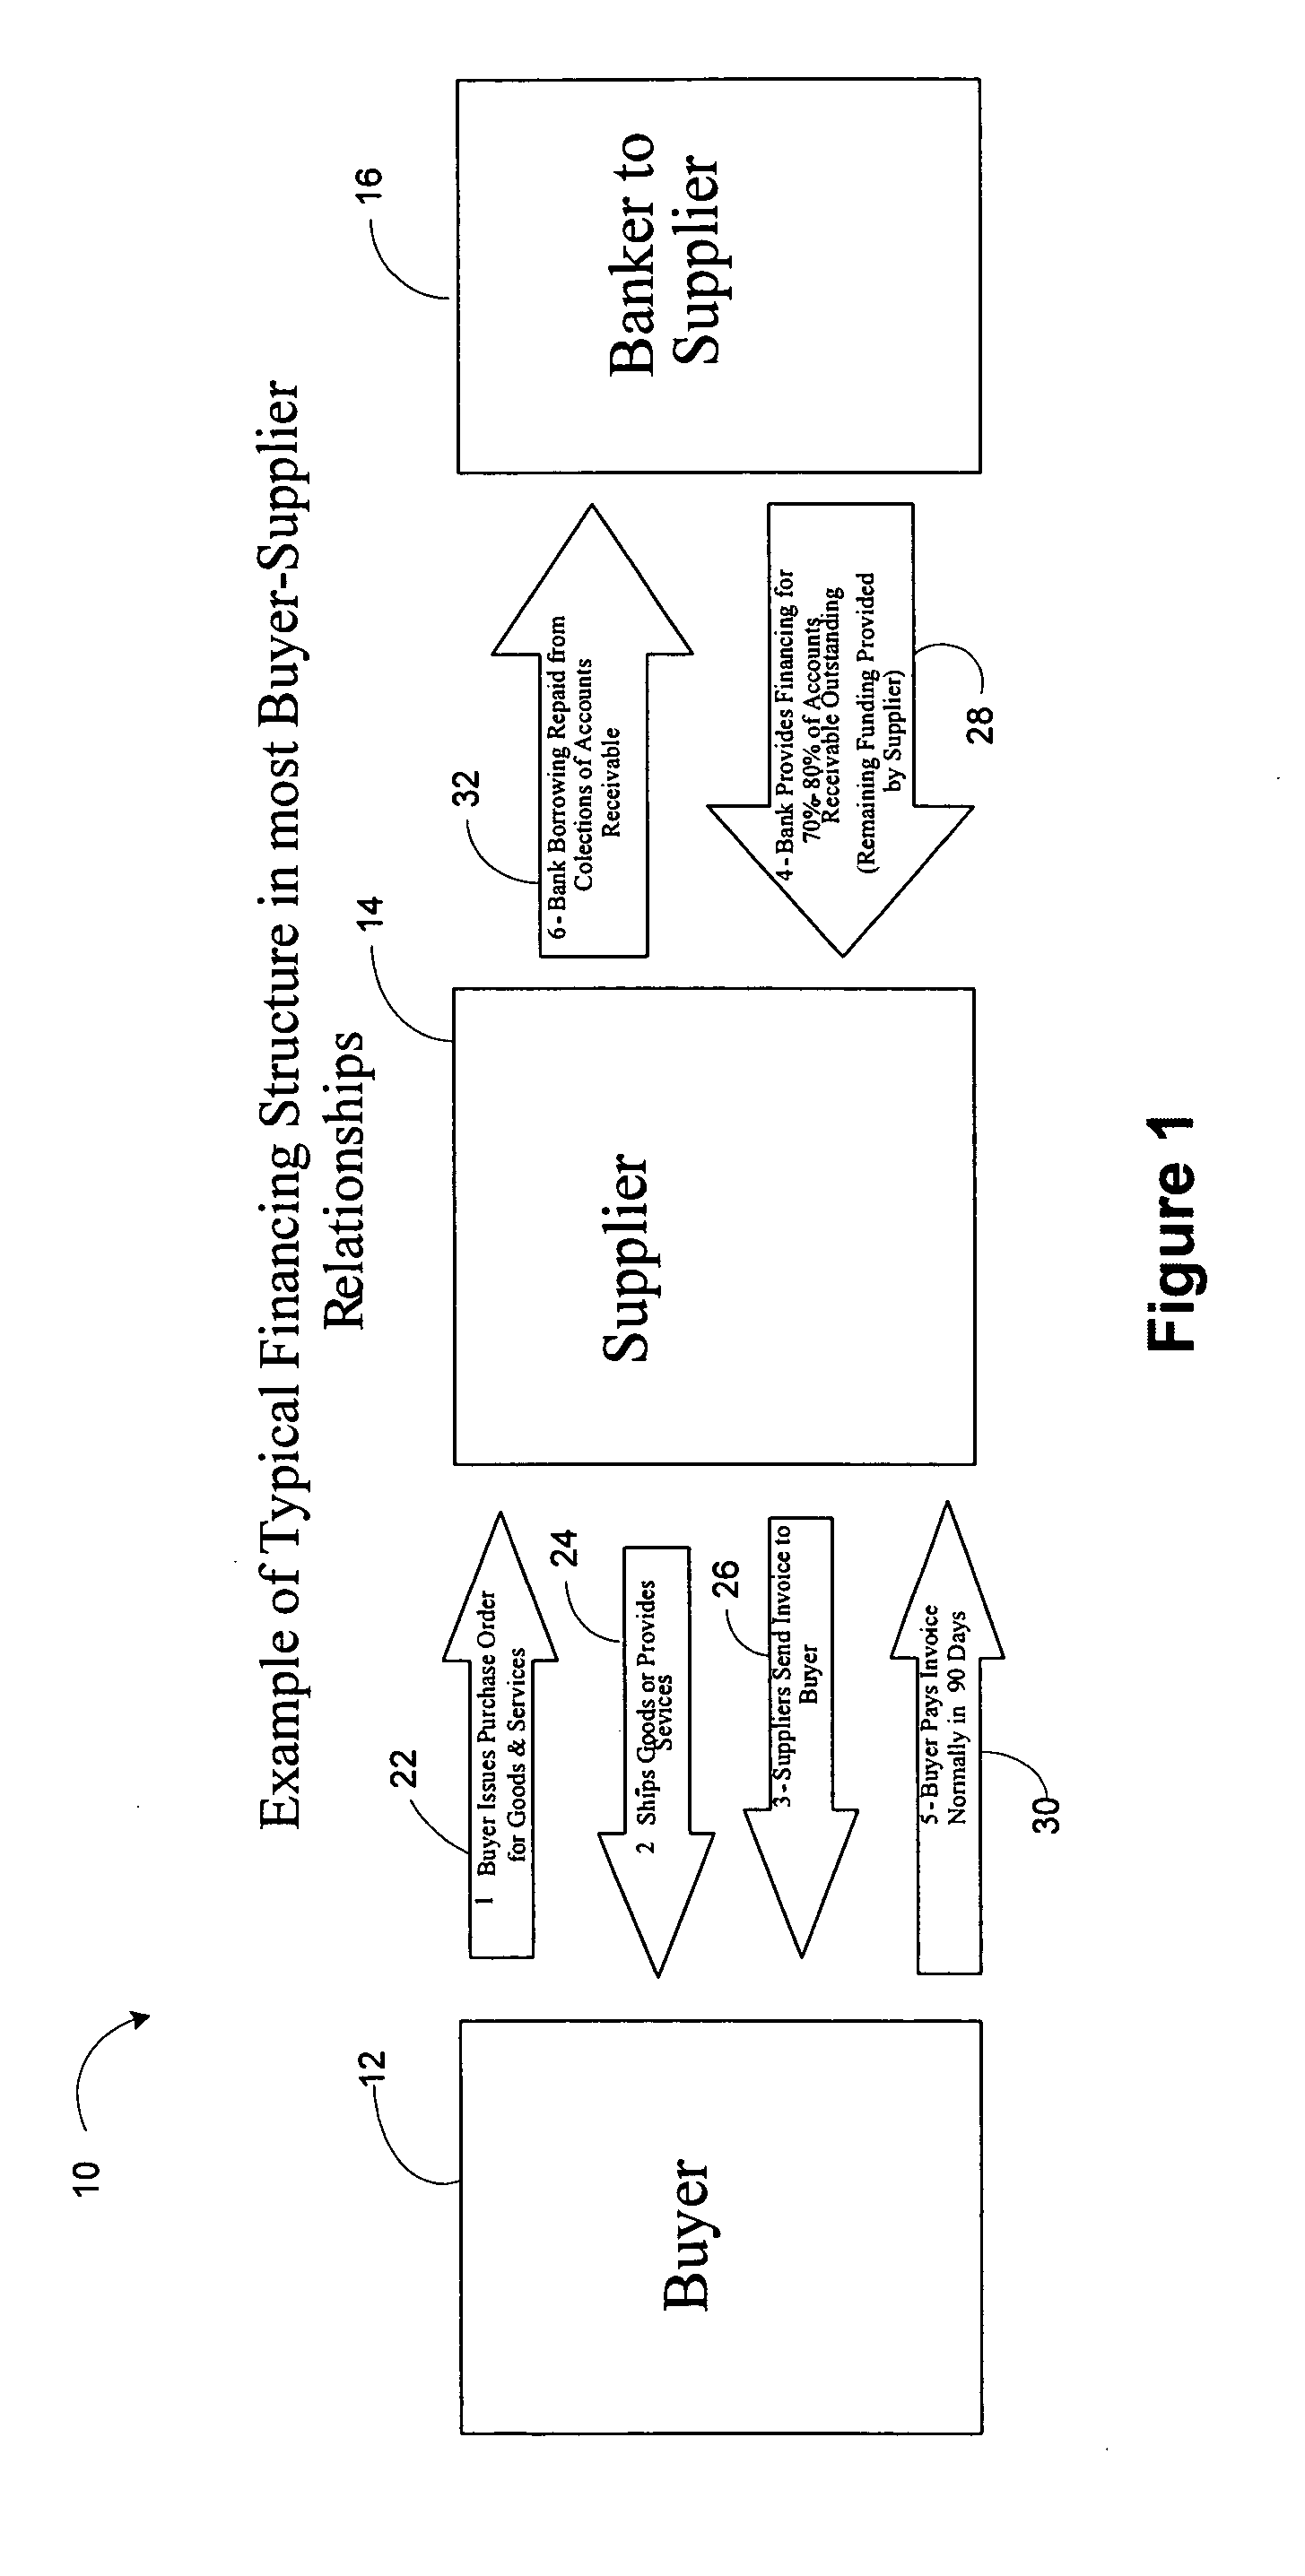 System and method of supply chain procurement, settlement and finance